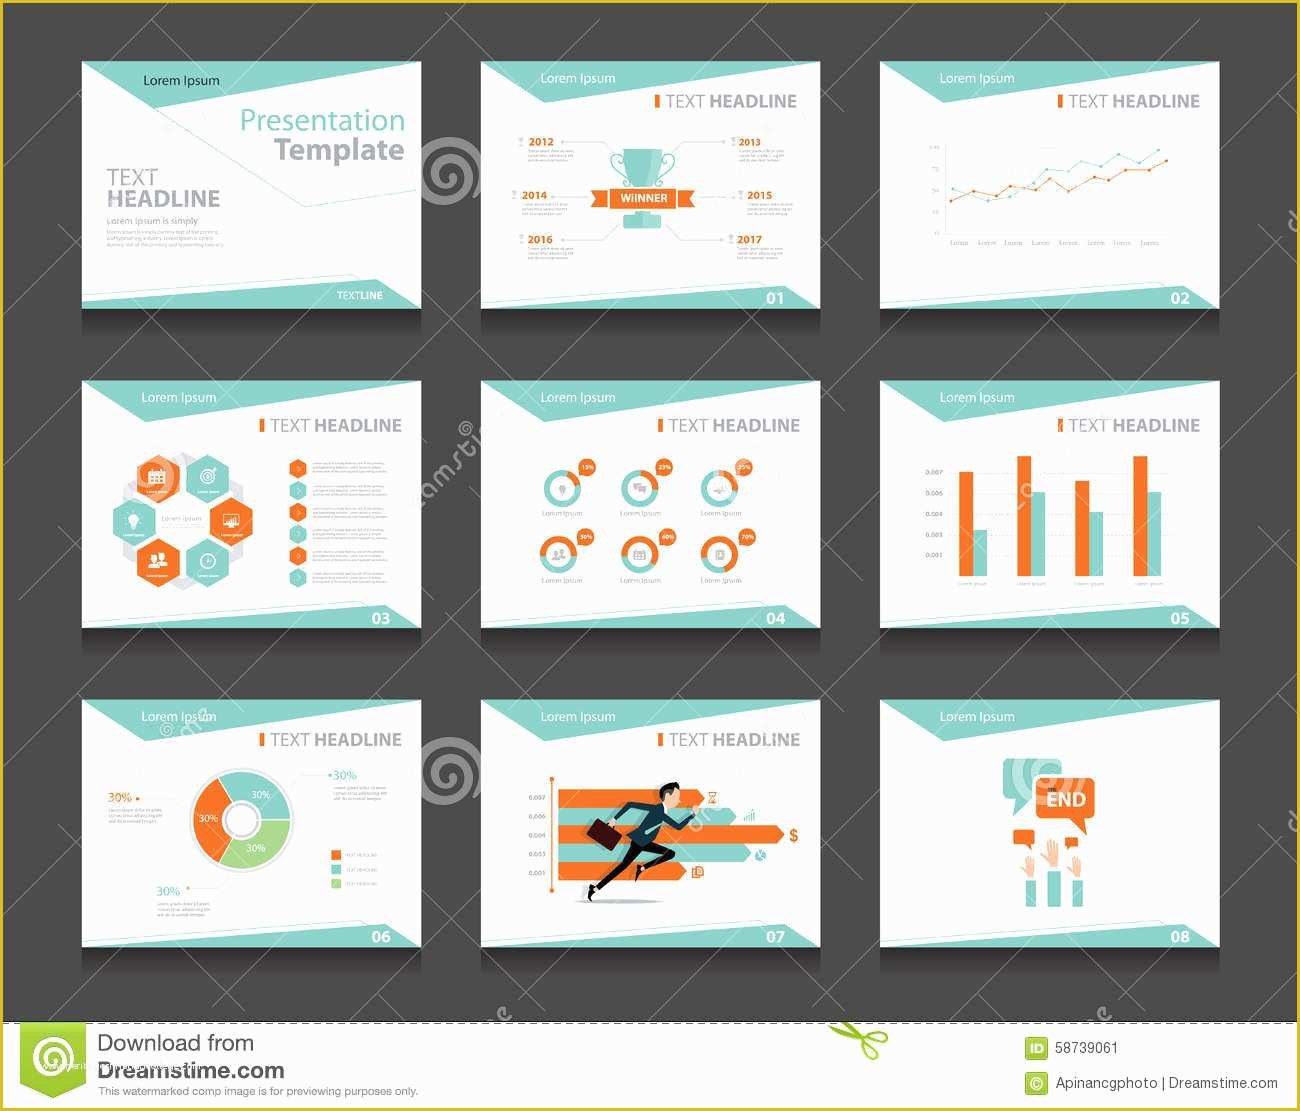 Free Powerpoint Templates 2017 Of Ppt Template Design Infographic Business Presentation